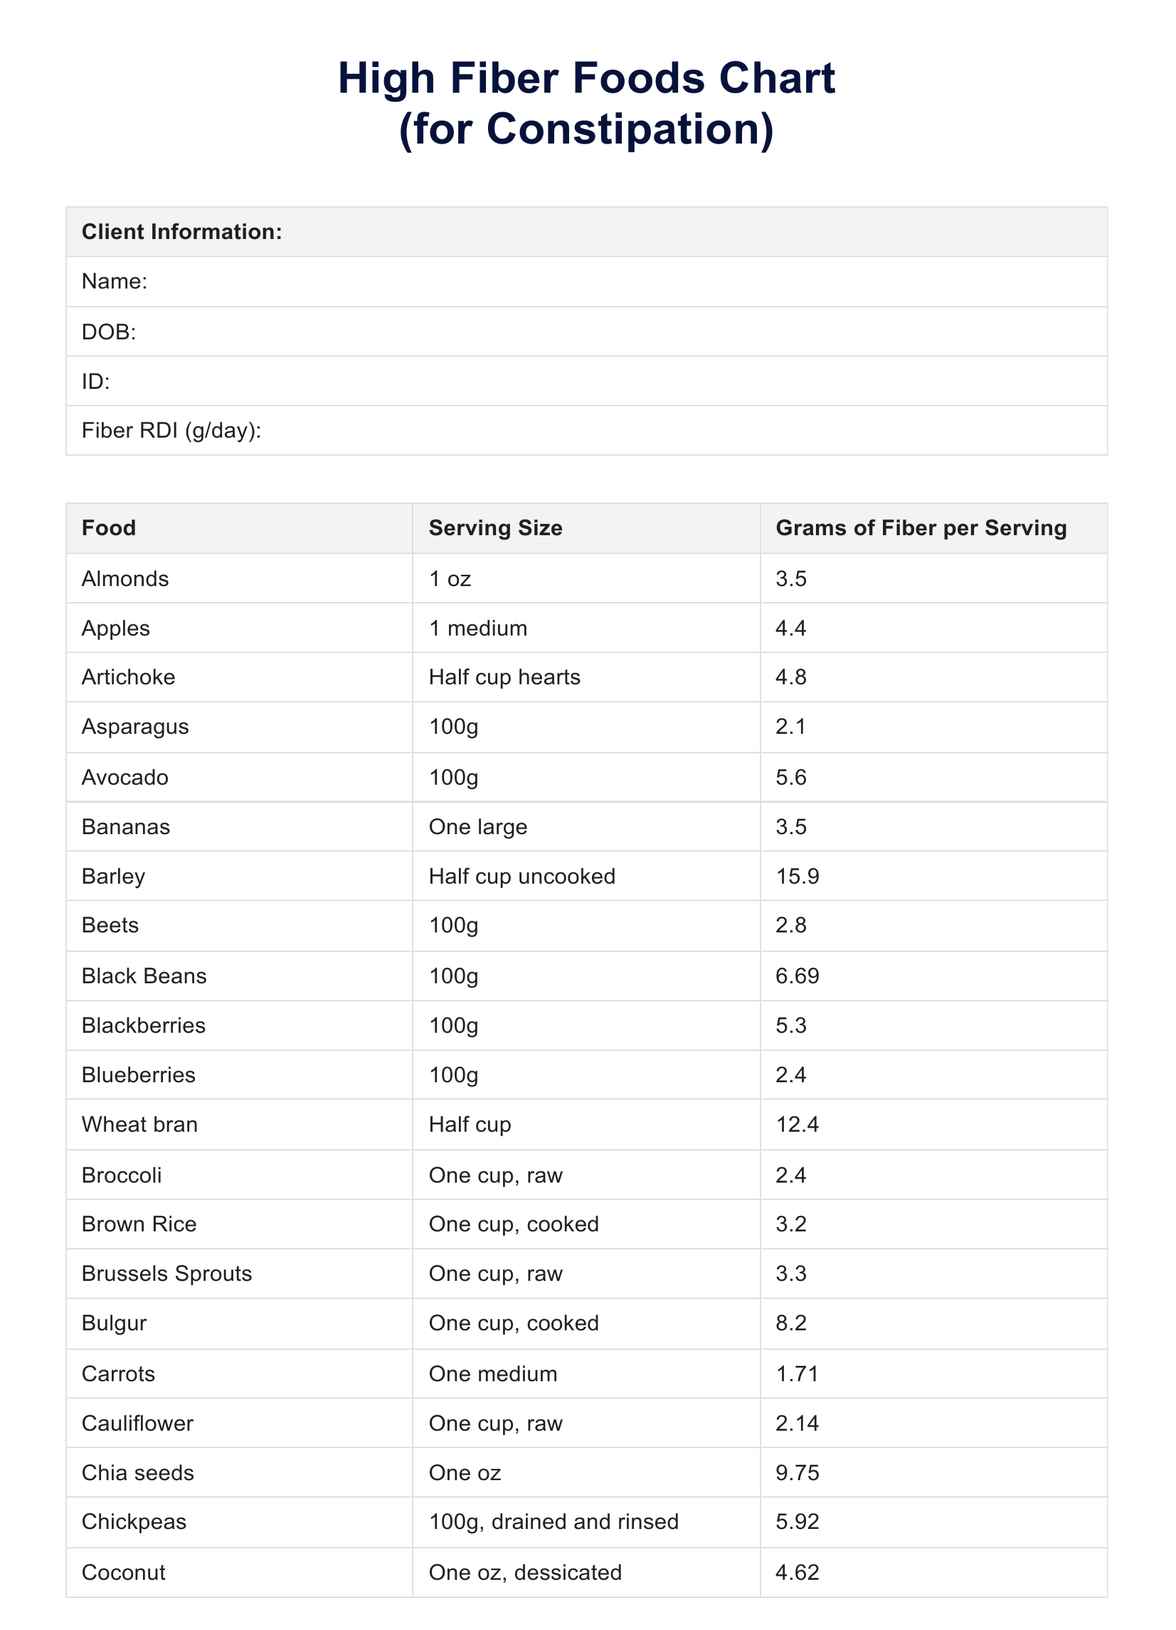 High Fiber Foods Chart for Constipation PDF Example